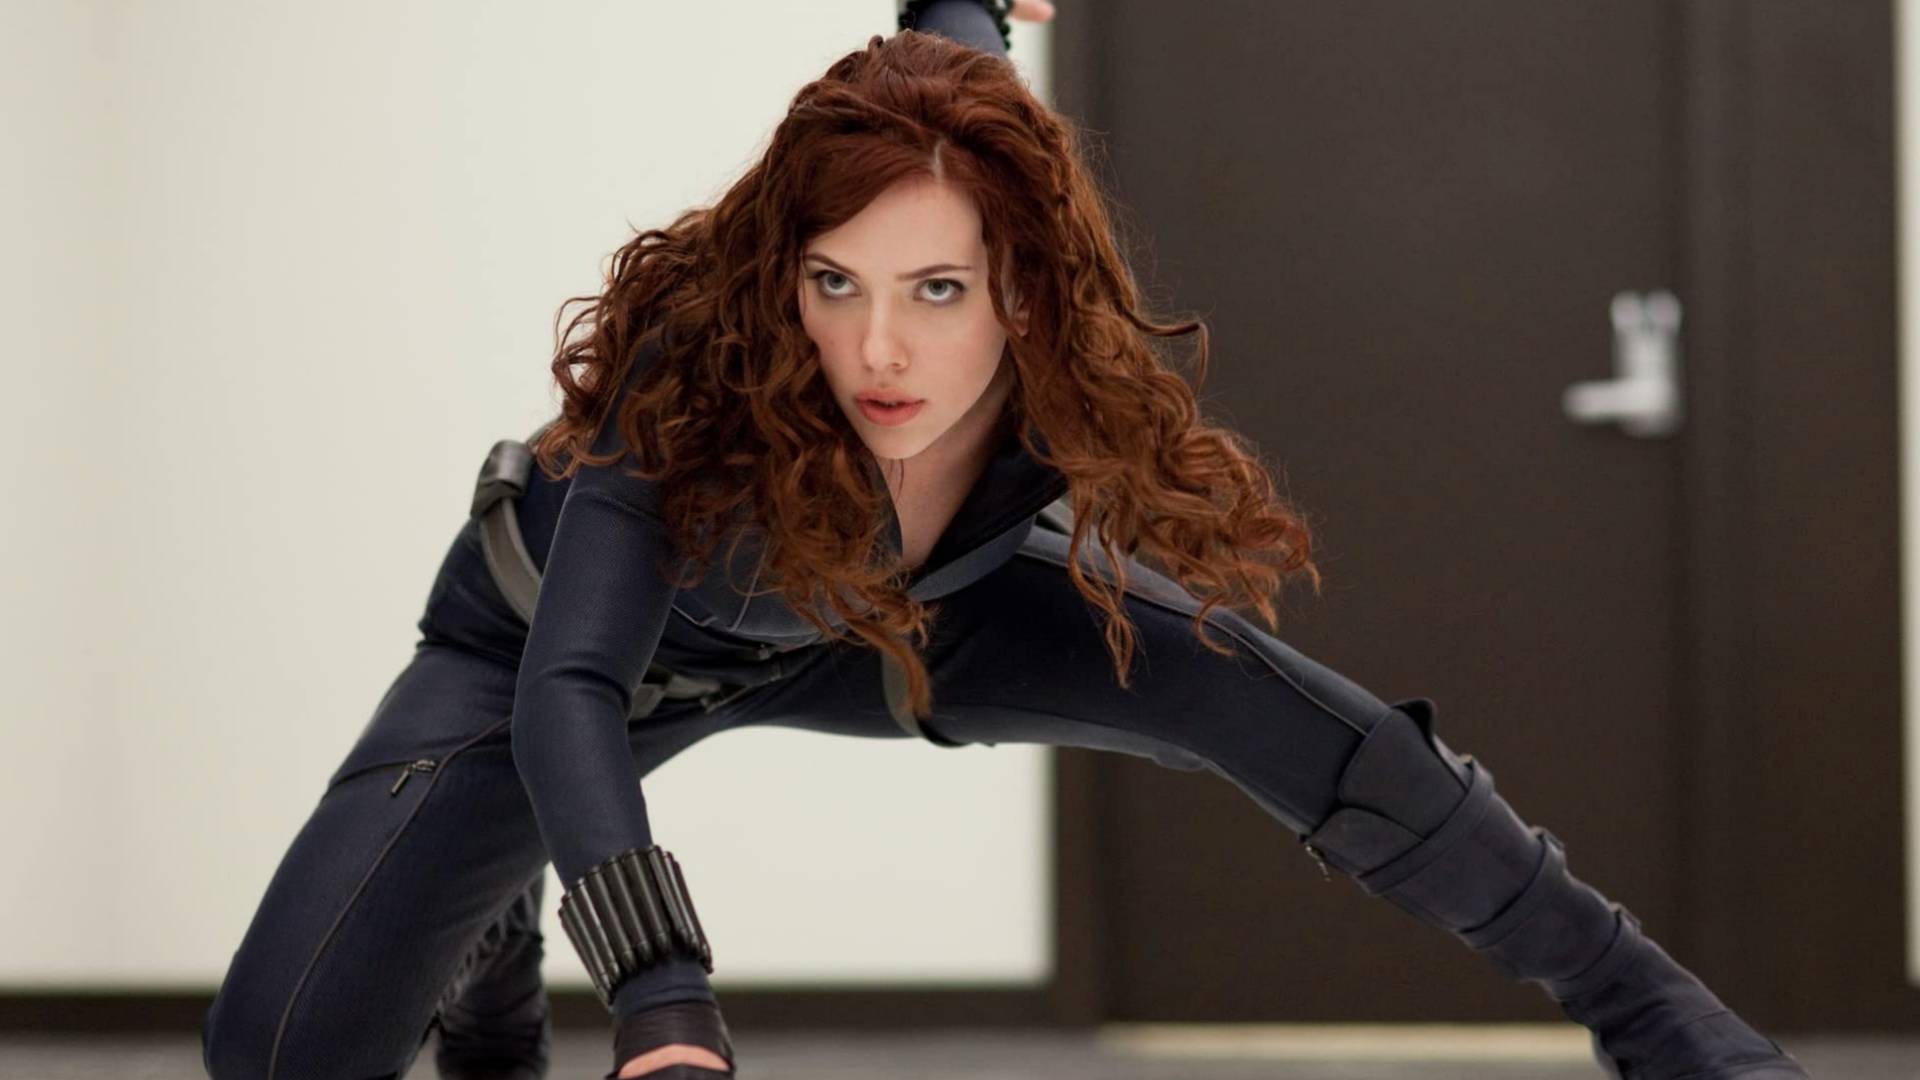 Scarlett Johansson Says Gravity Audition Was Weird, Hopeless After Losing  Role